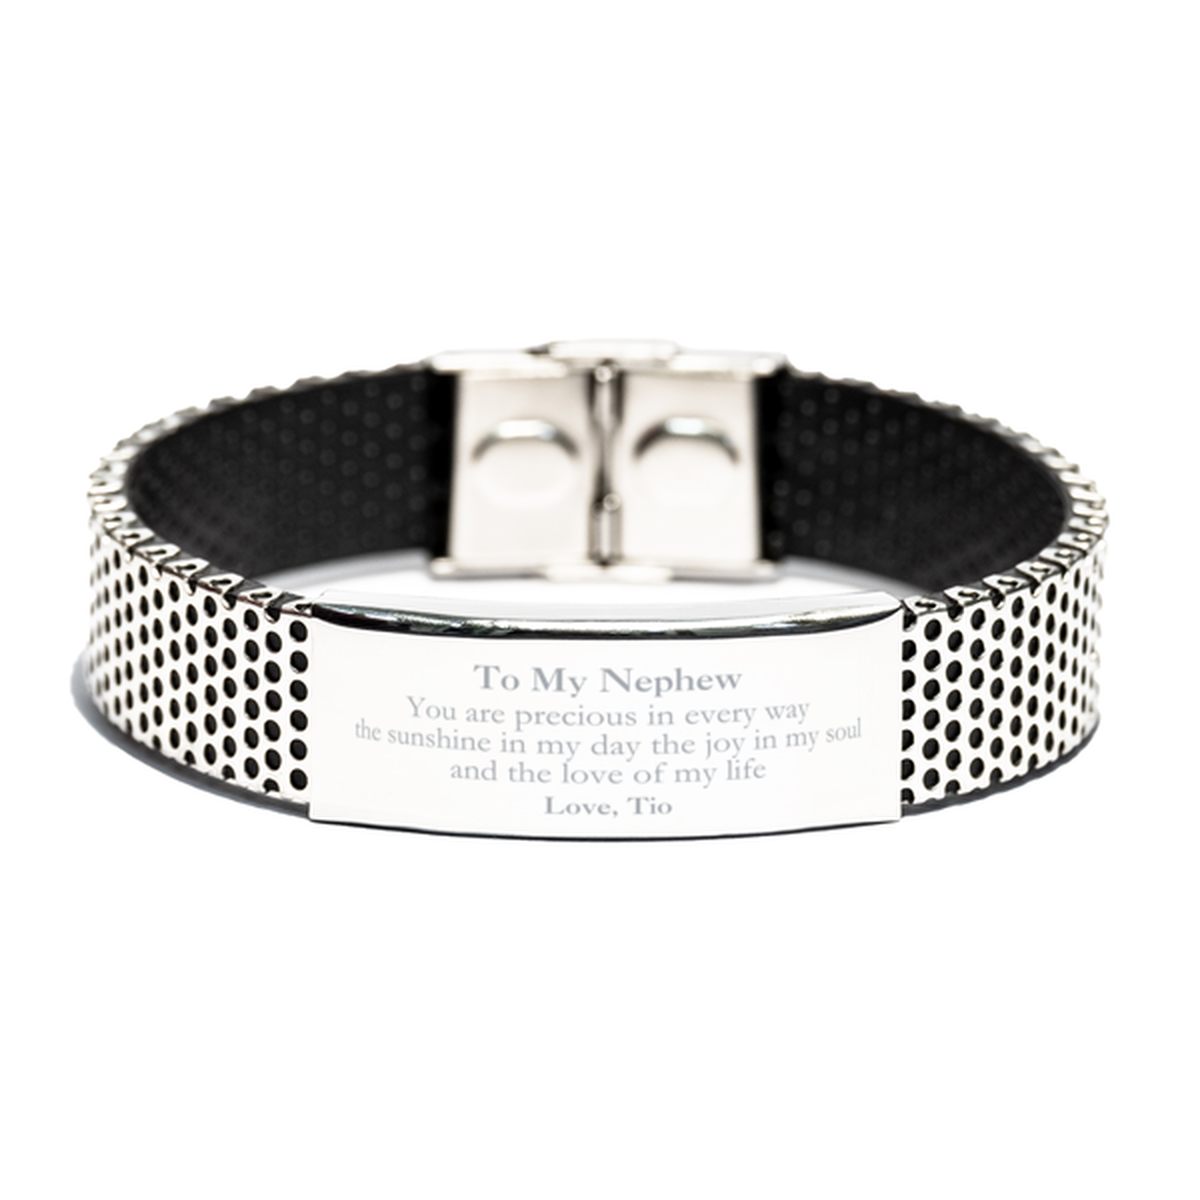 Graduation Gifts for Nephew Stainless Steel Bracelet Present from Tio, Christmas Nephew Birthday Gifts Nephew You are precious in every way the sunshine in my day. Love, Tio